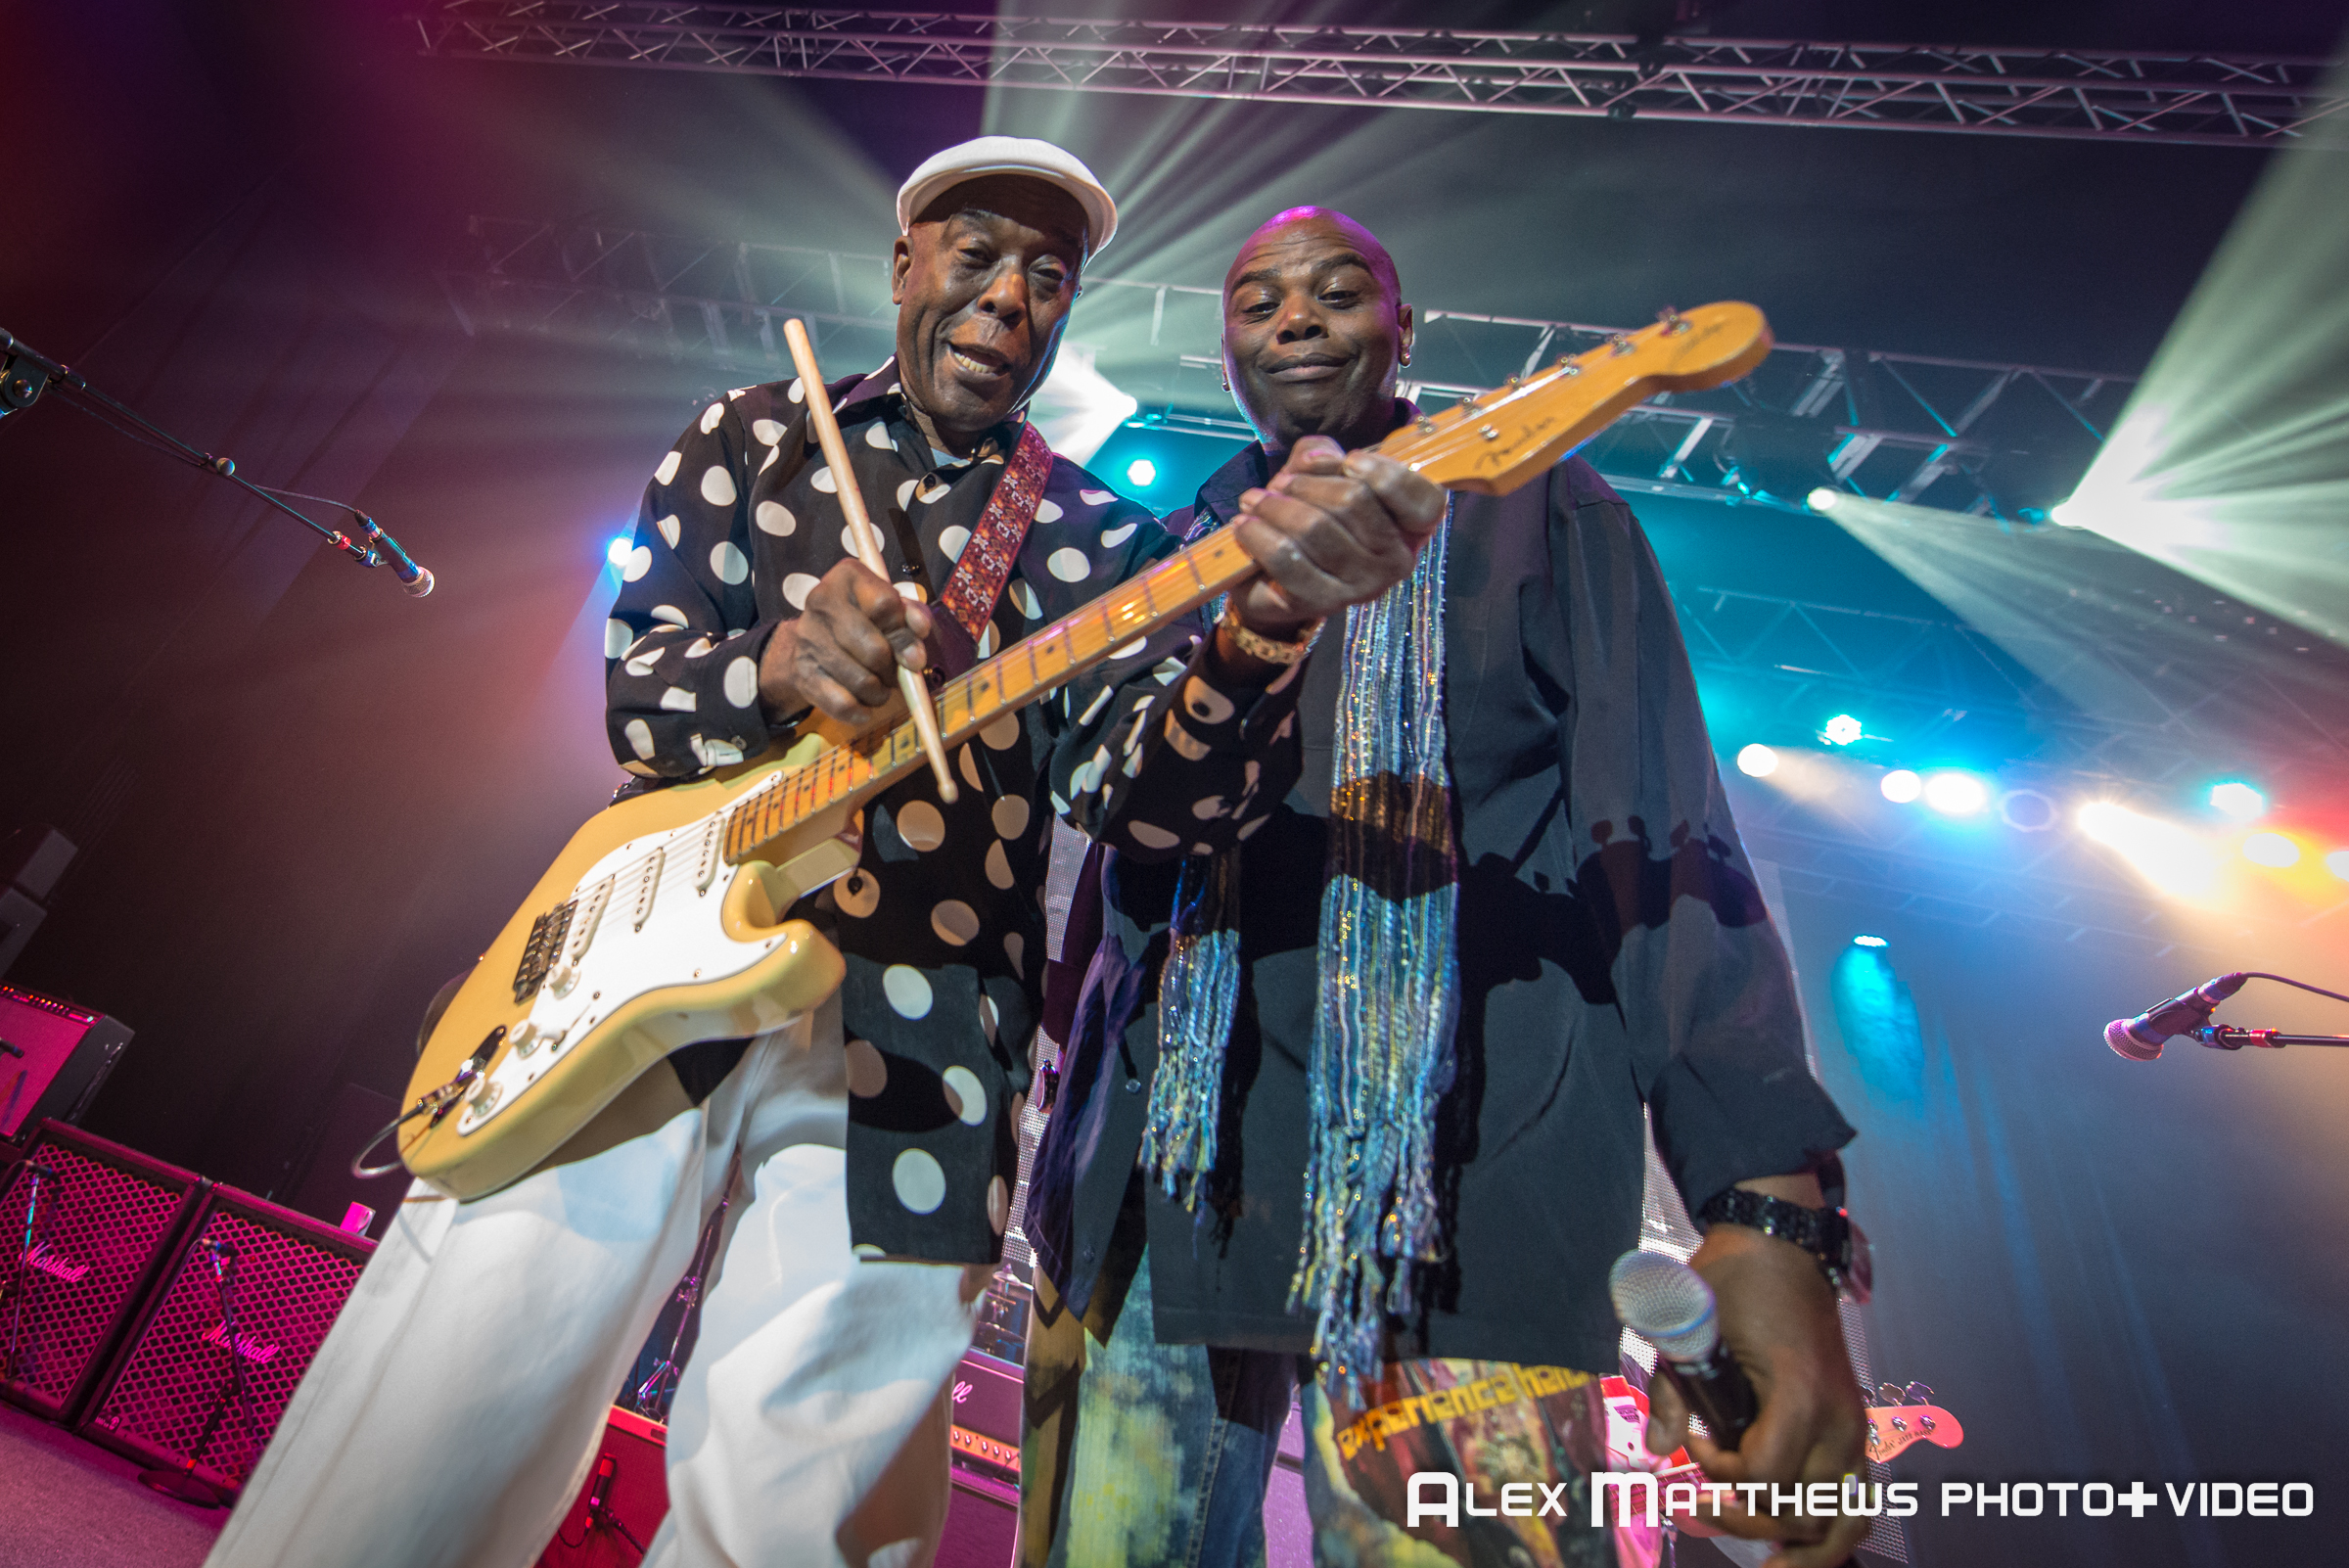 Buddy Guy at the Experience Hendrix Tour